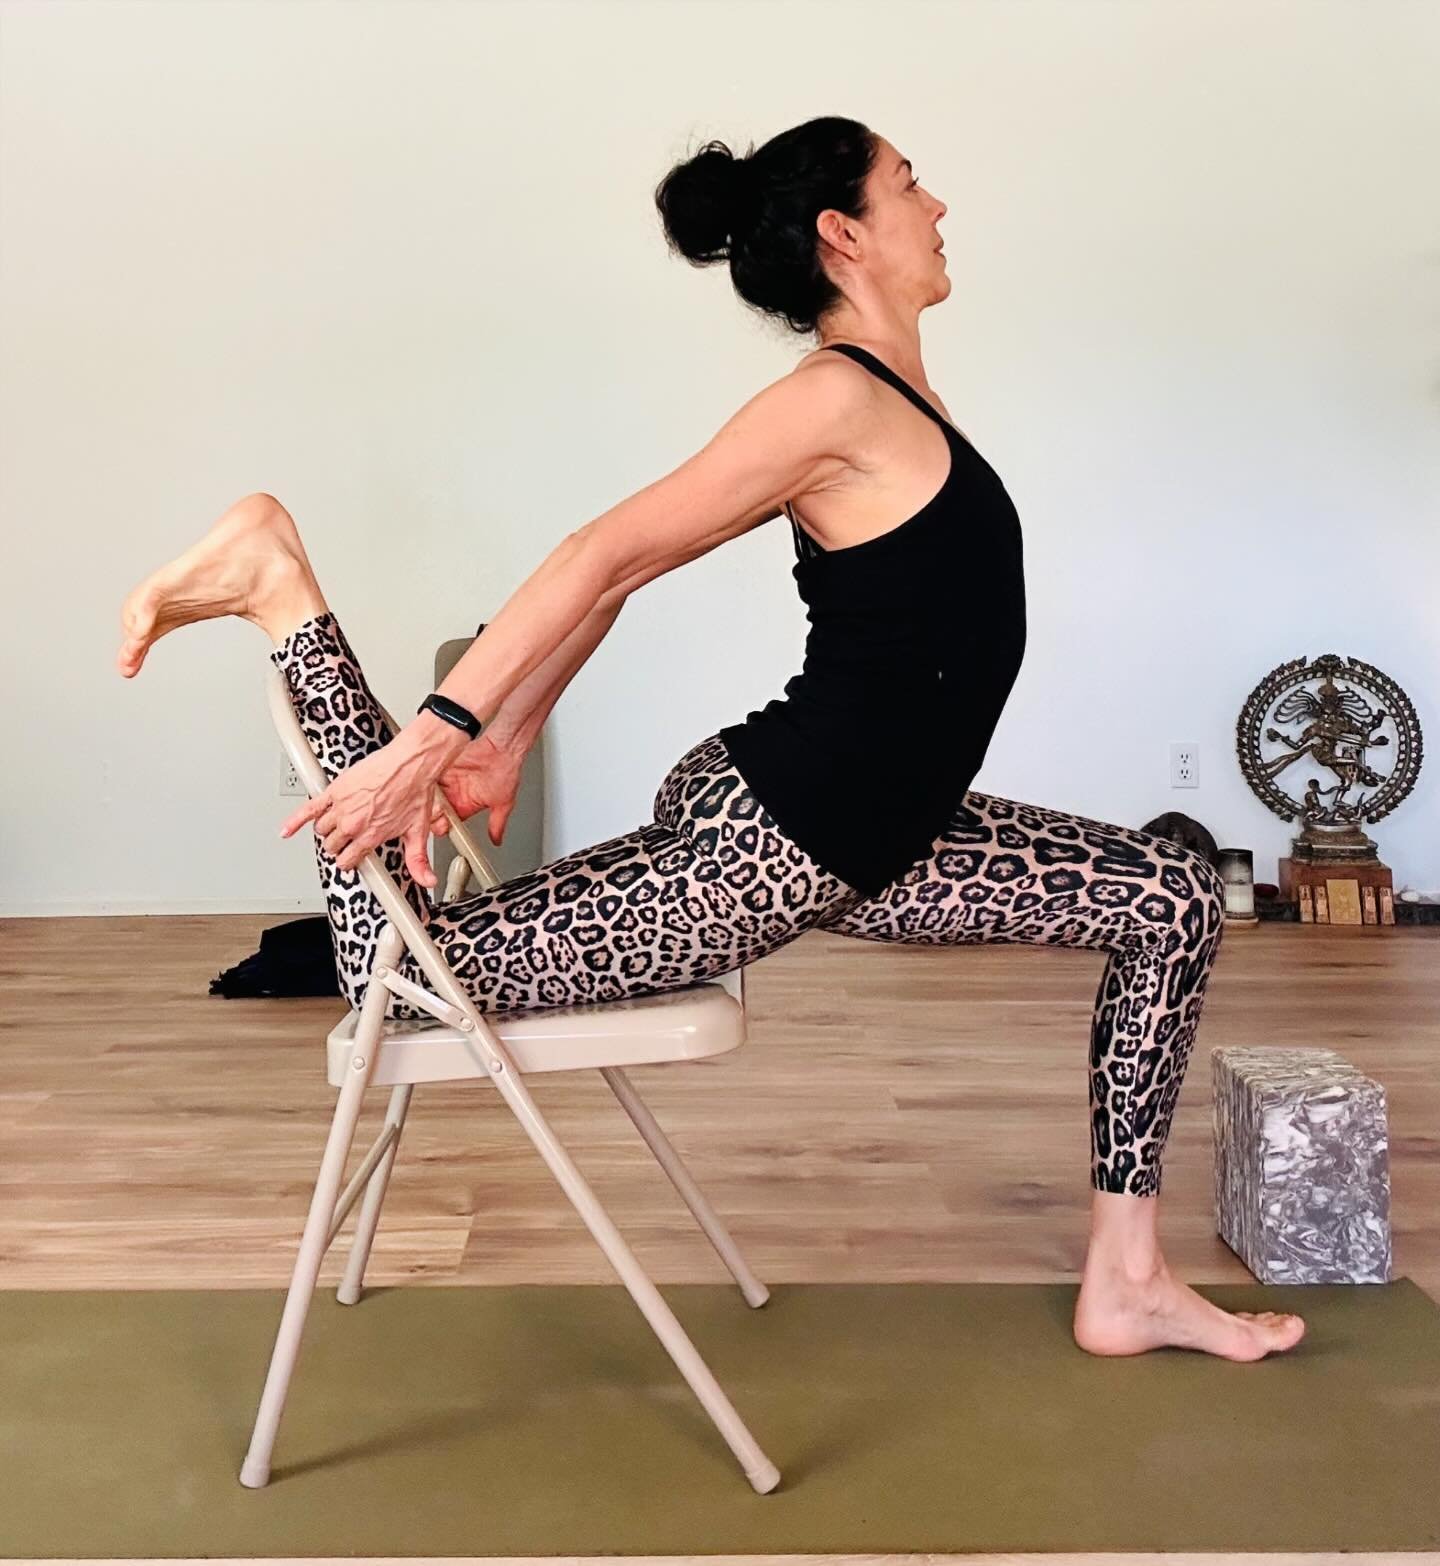 Working on therapeutic backbends this week with a chair. The chair provides a wonderful support to feel the integrity of the pose and move into it in stages. 

Backbends keep the spine young and healthy. ✨

Come and join one of my weekly online class